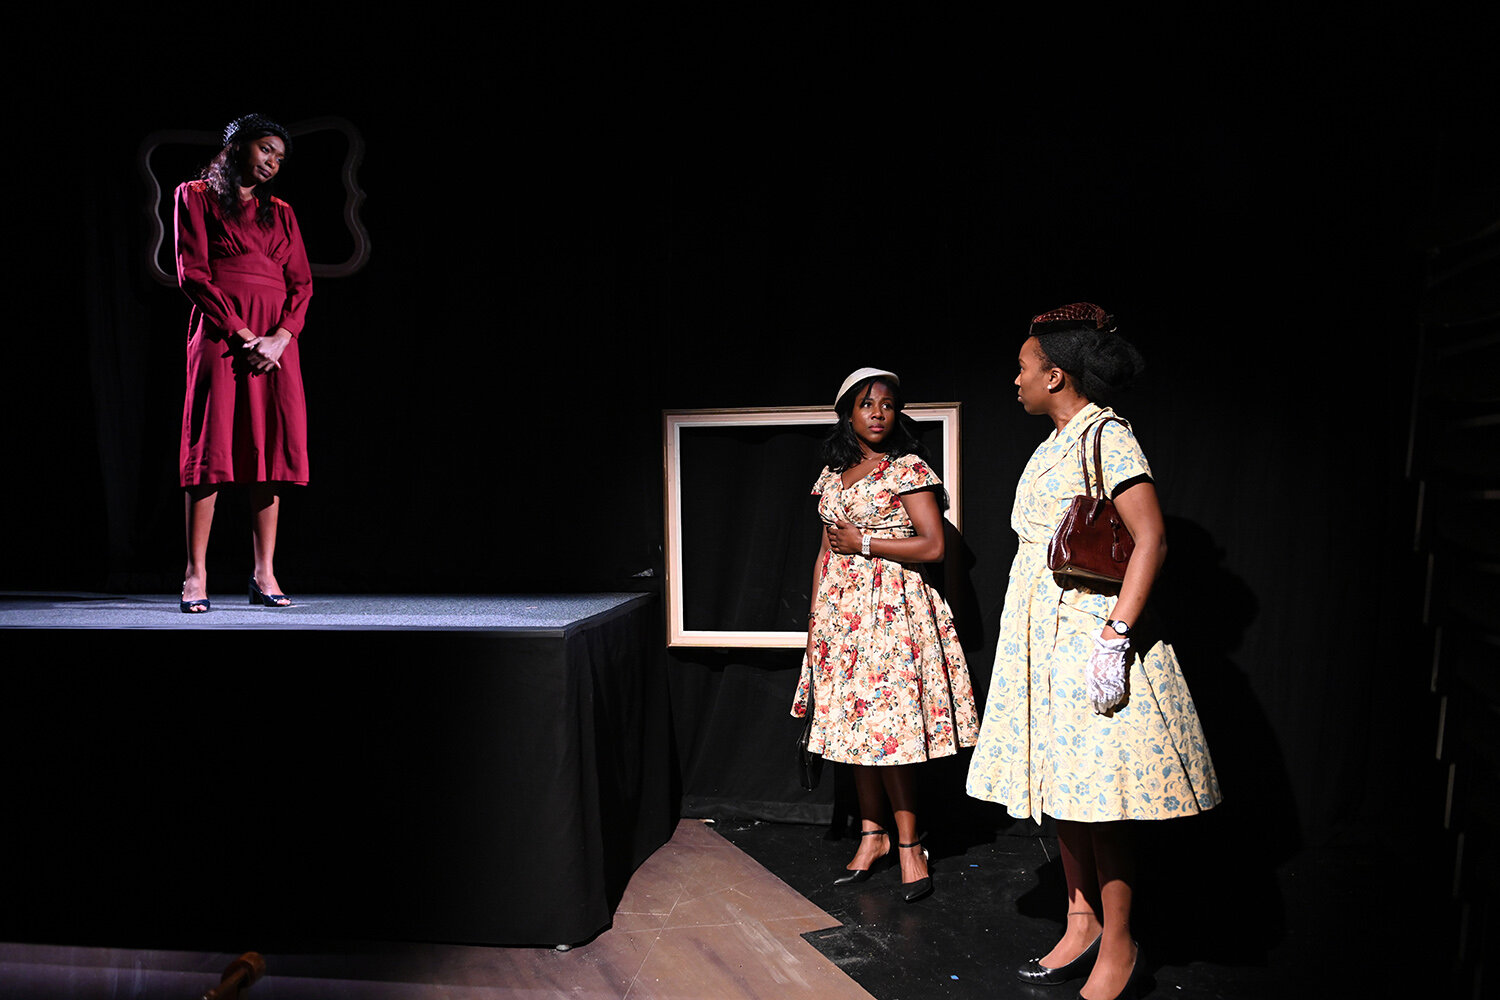  Pictured (left to right): Kayland Jordan as “Annabelle ‘Belle’ Pierson,” Natalie Jacobs as “Constance Jenkins,” and AnJu Hyppolite as “Mabel Mosley.” 